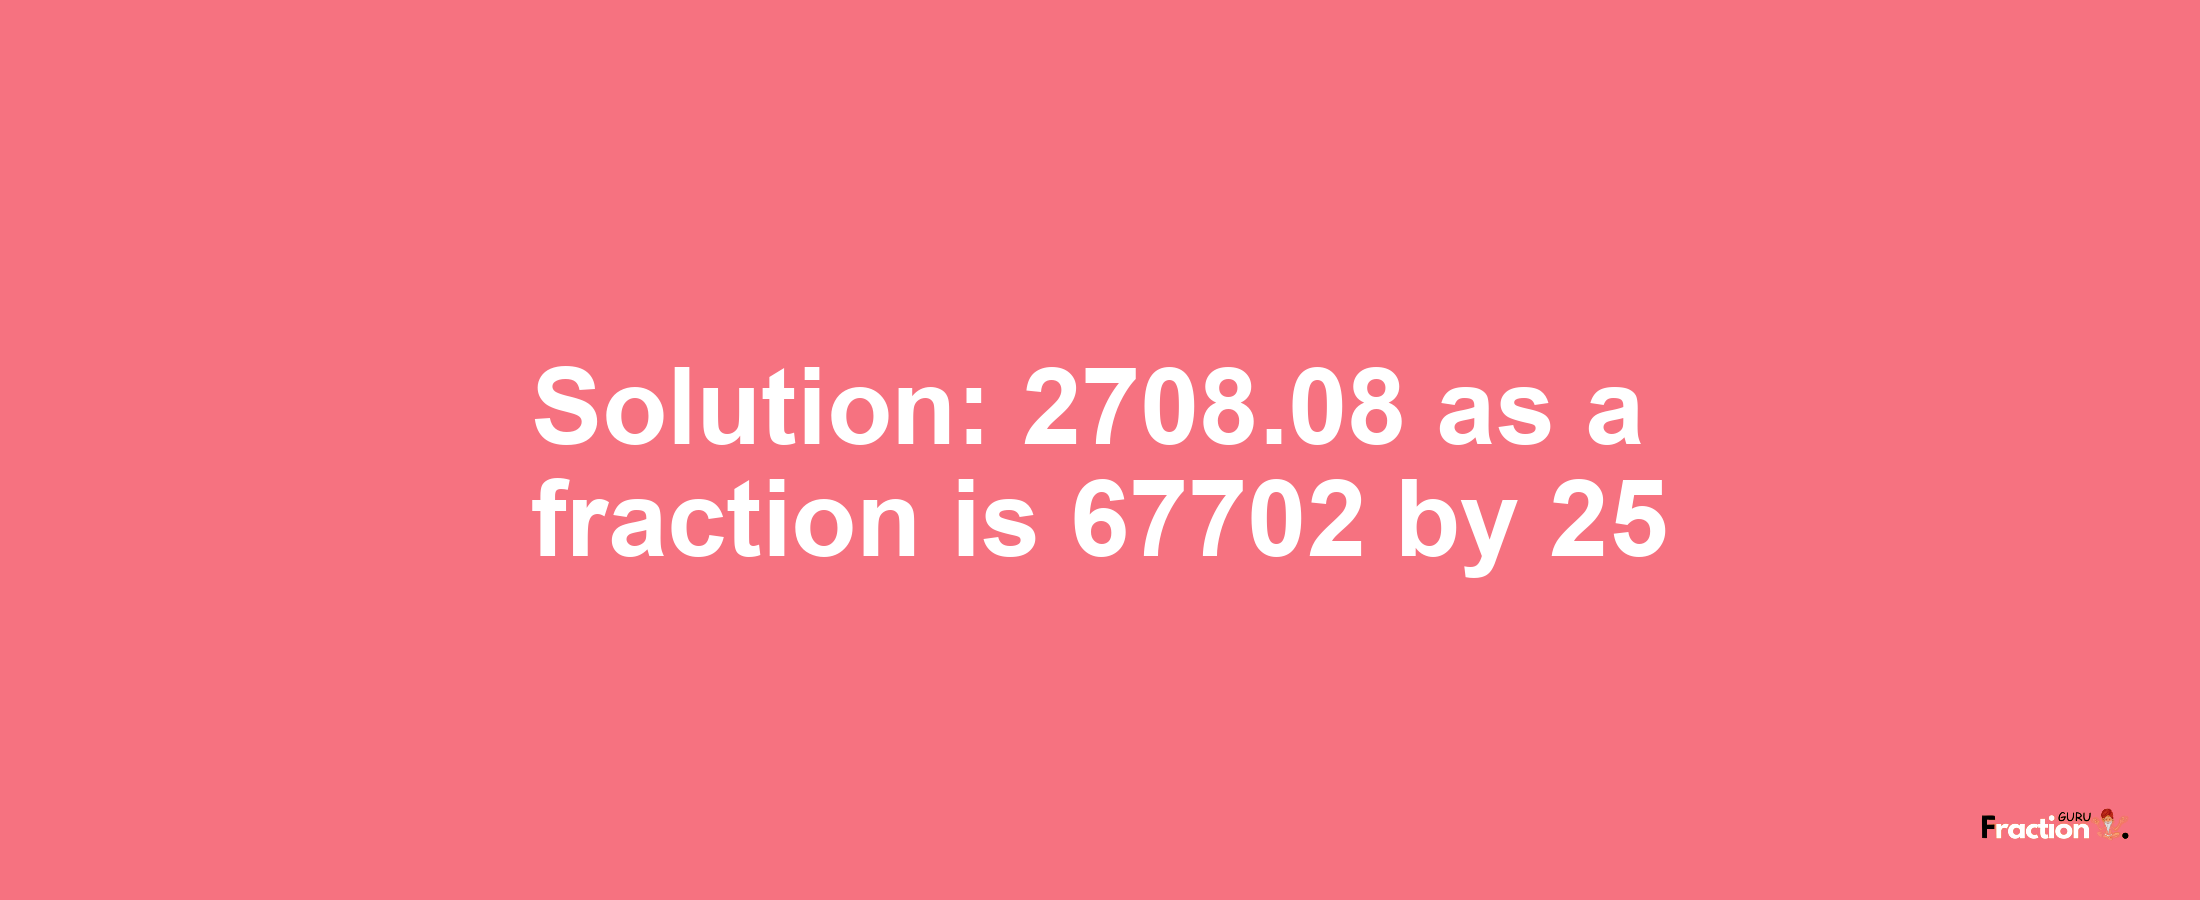 Solution:2708.08 as a fraction is 67702/25